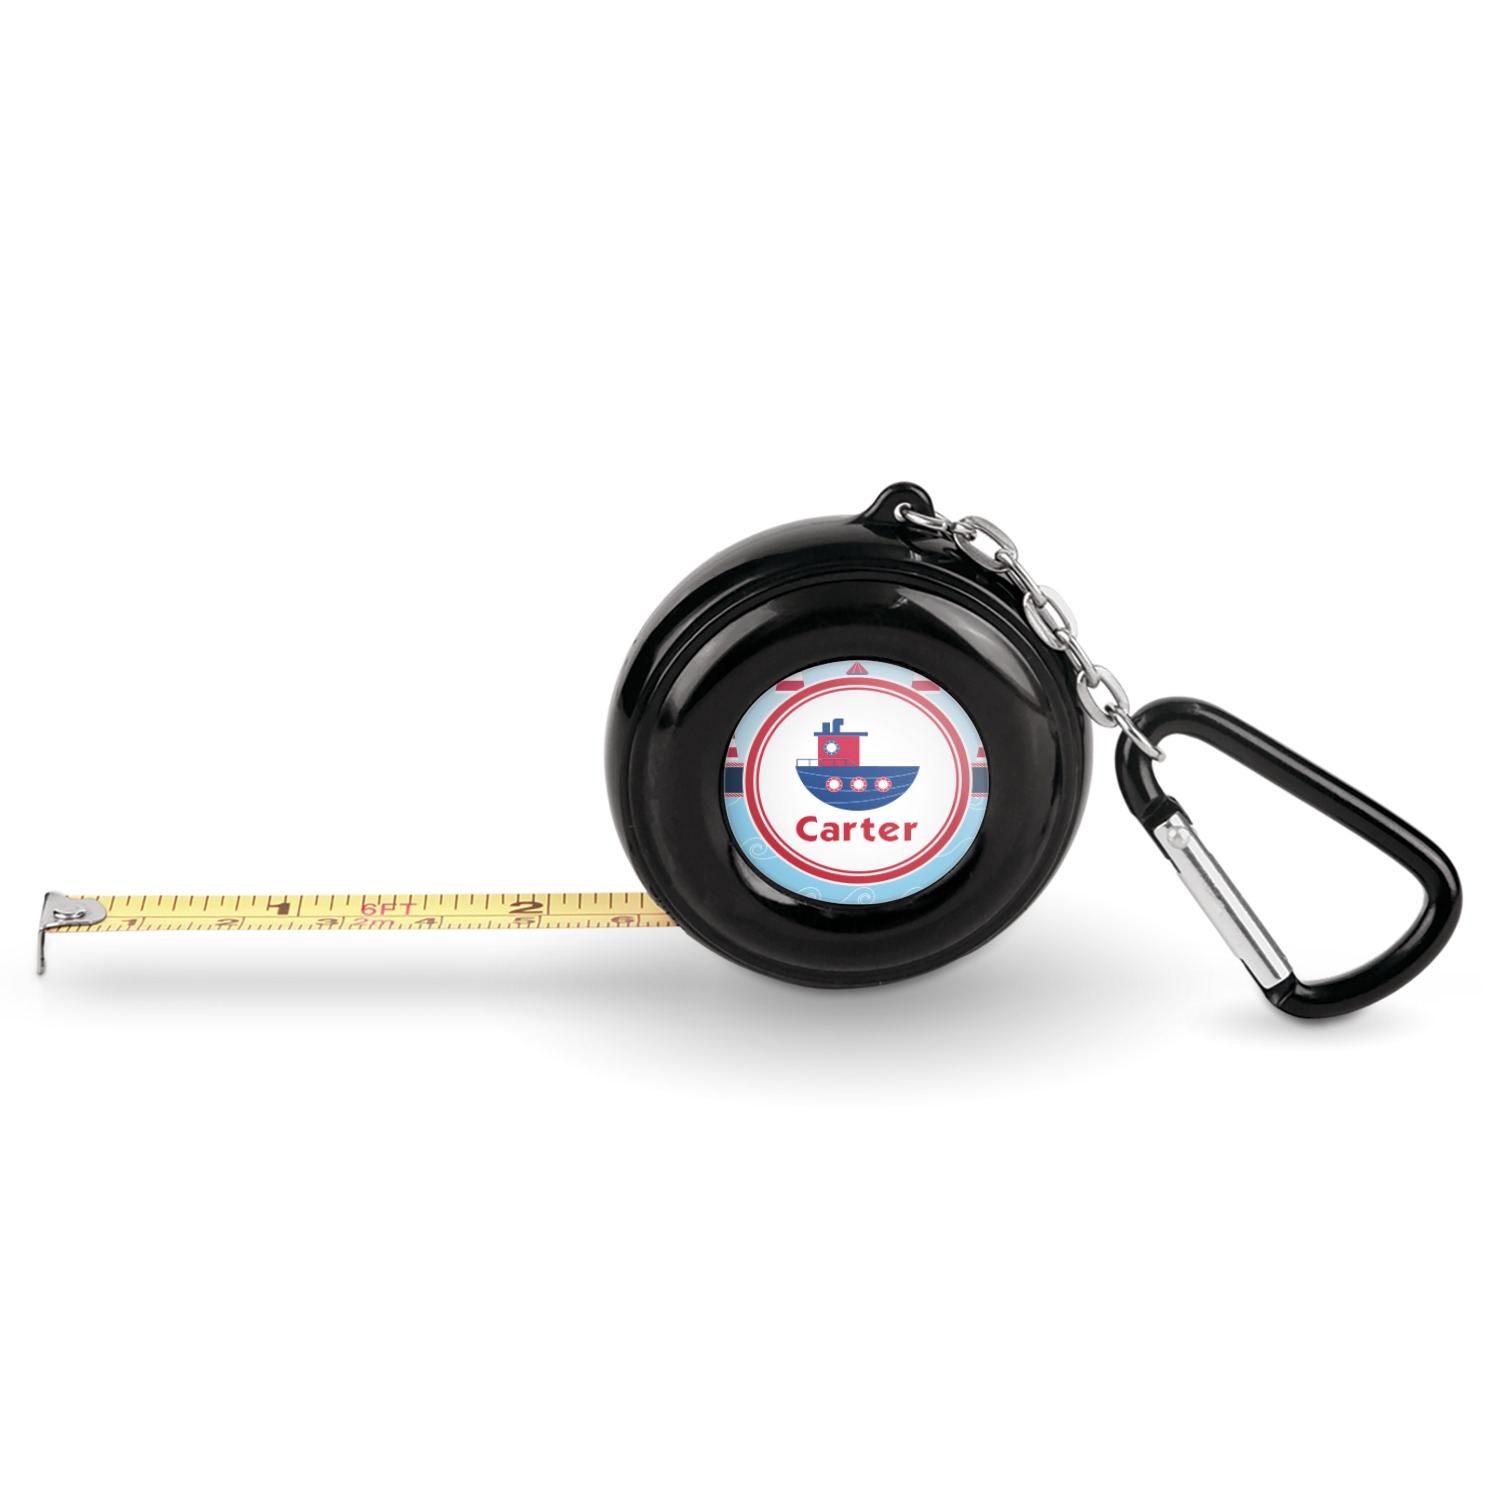 https://www.youcustomizeit.com/common/MAKE/40759/Light-House-Waves-6-Ft-Pocket-Tape-Measure-with-Carabiner-Hook-Front.jpg?lm=1555223803